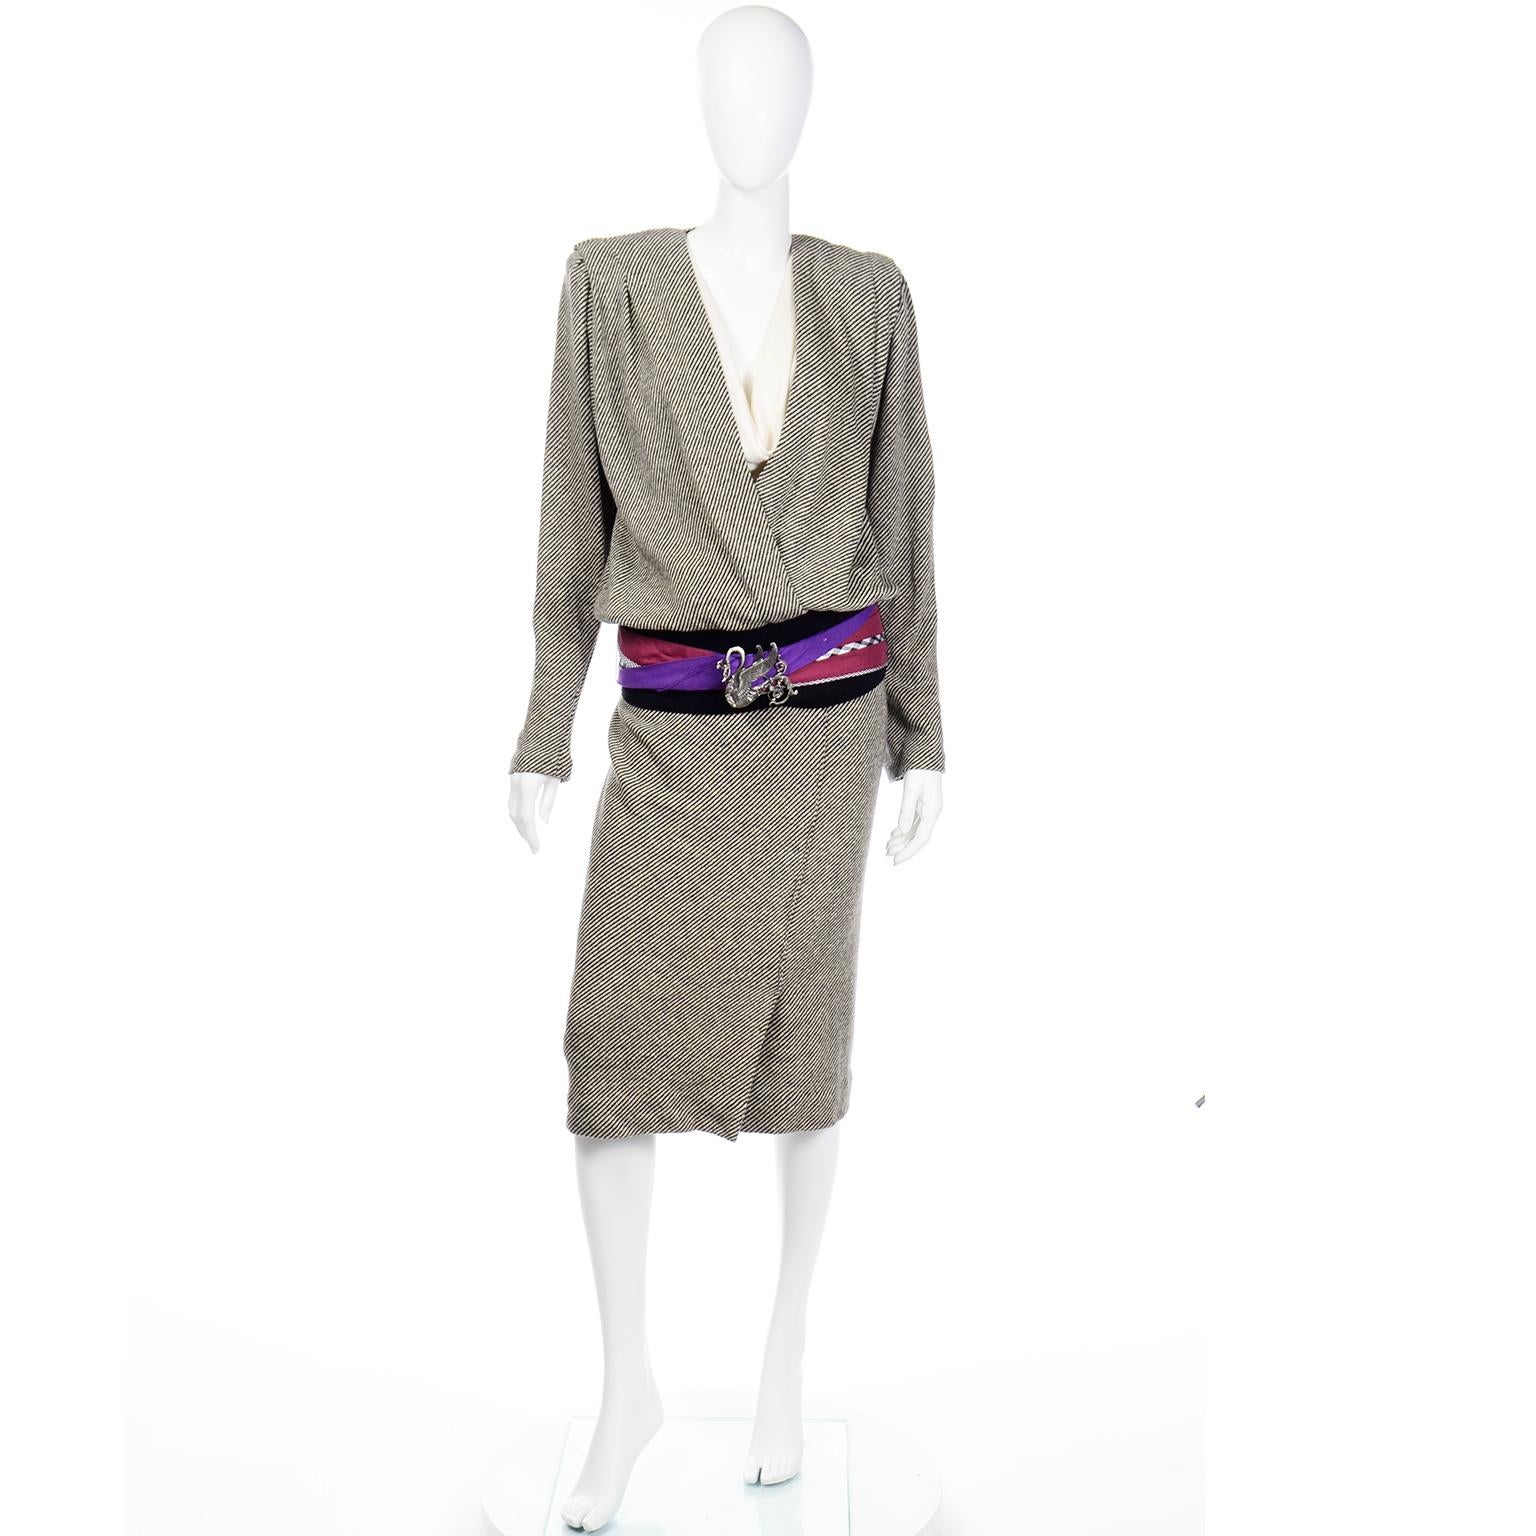 This is a wonderful 2 piece dress & belt from Norma Walters. This 1980's ensemble includes a linen top with matching pencil skirt and linen mixed pattern belt with a really unique peacock metal buckle. The previous owner wore the belt with this